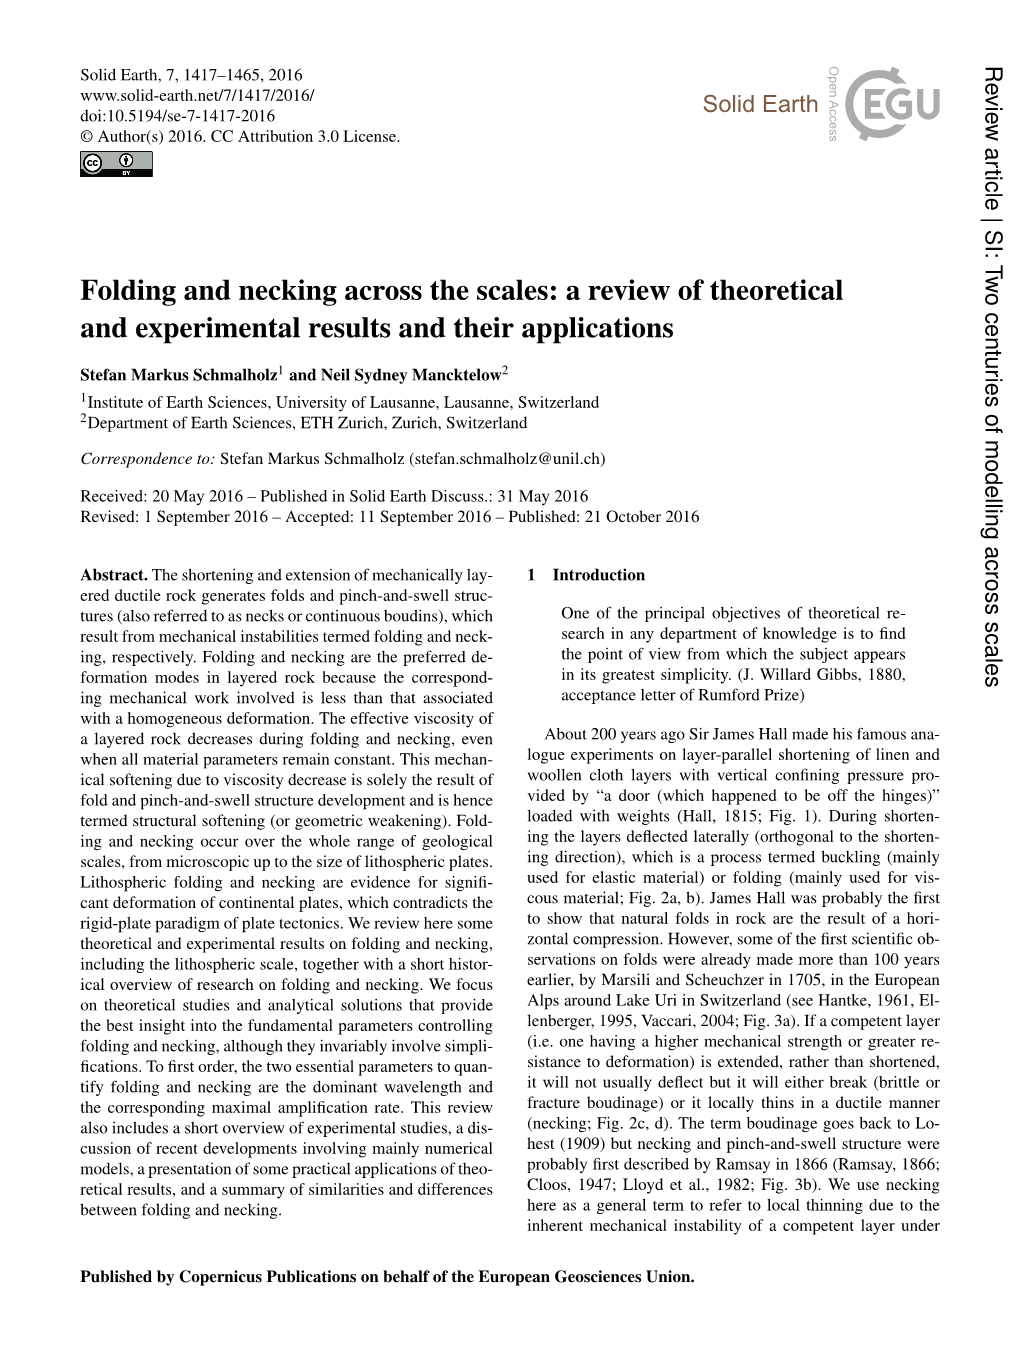 Folding and Necking Across the Scales: a Review of Theoretical and Experimental Results and Their Applications